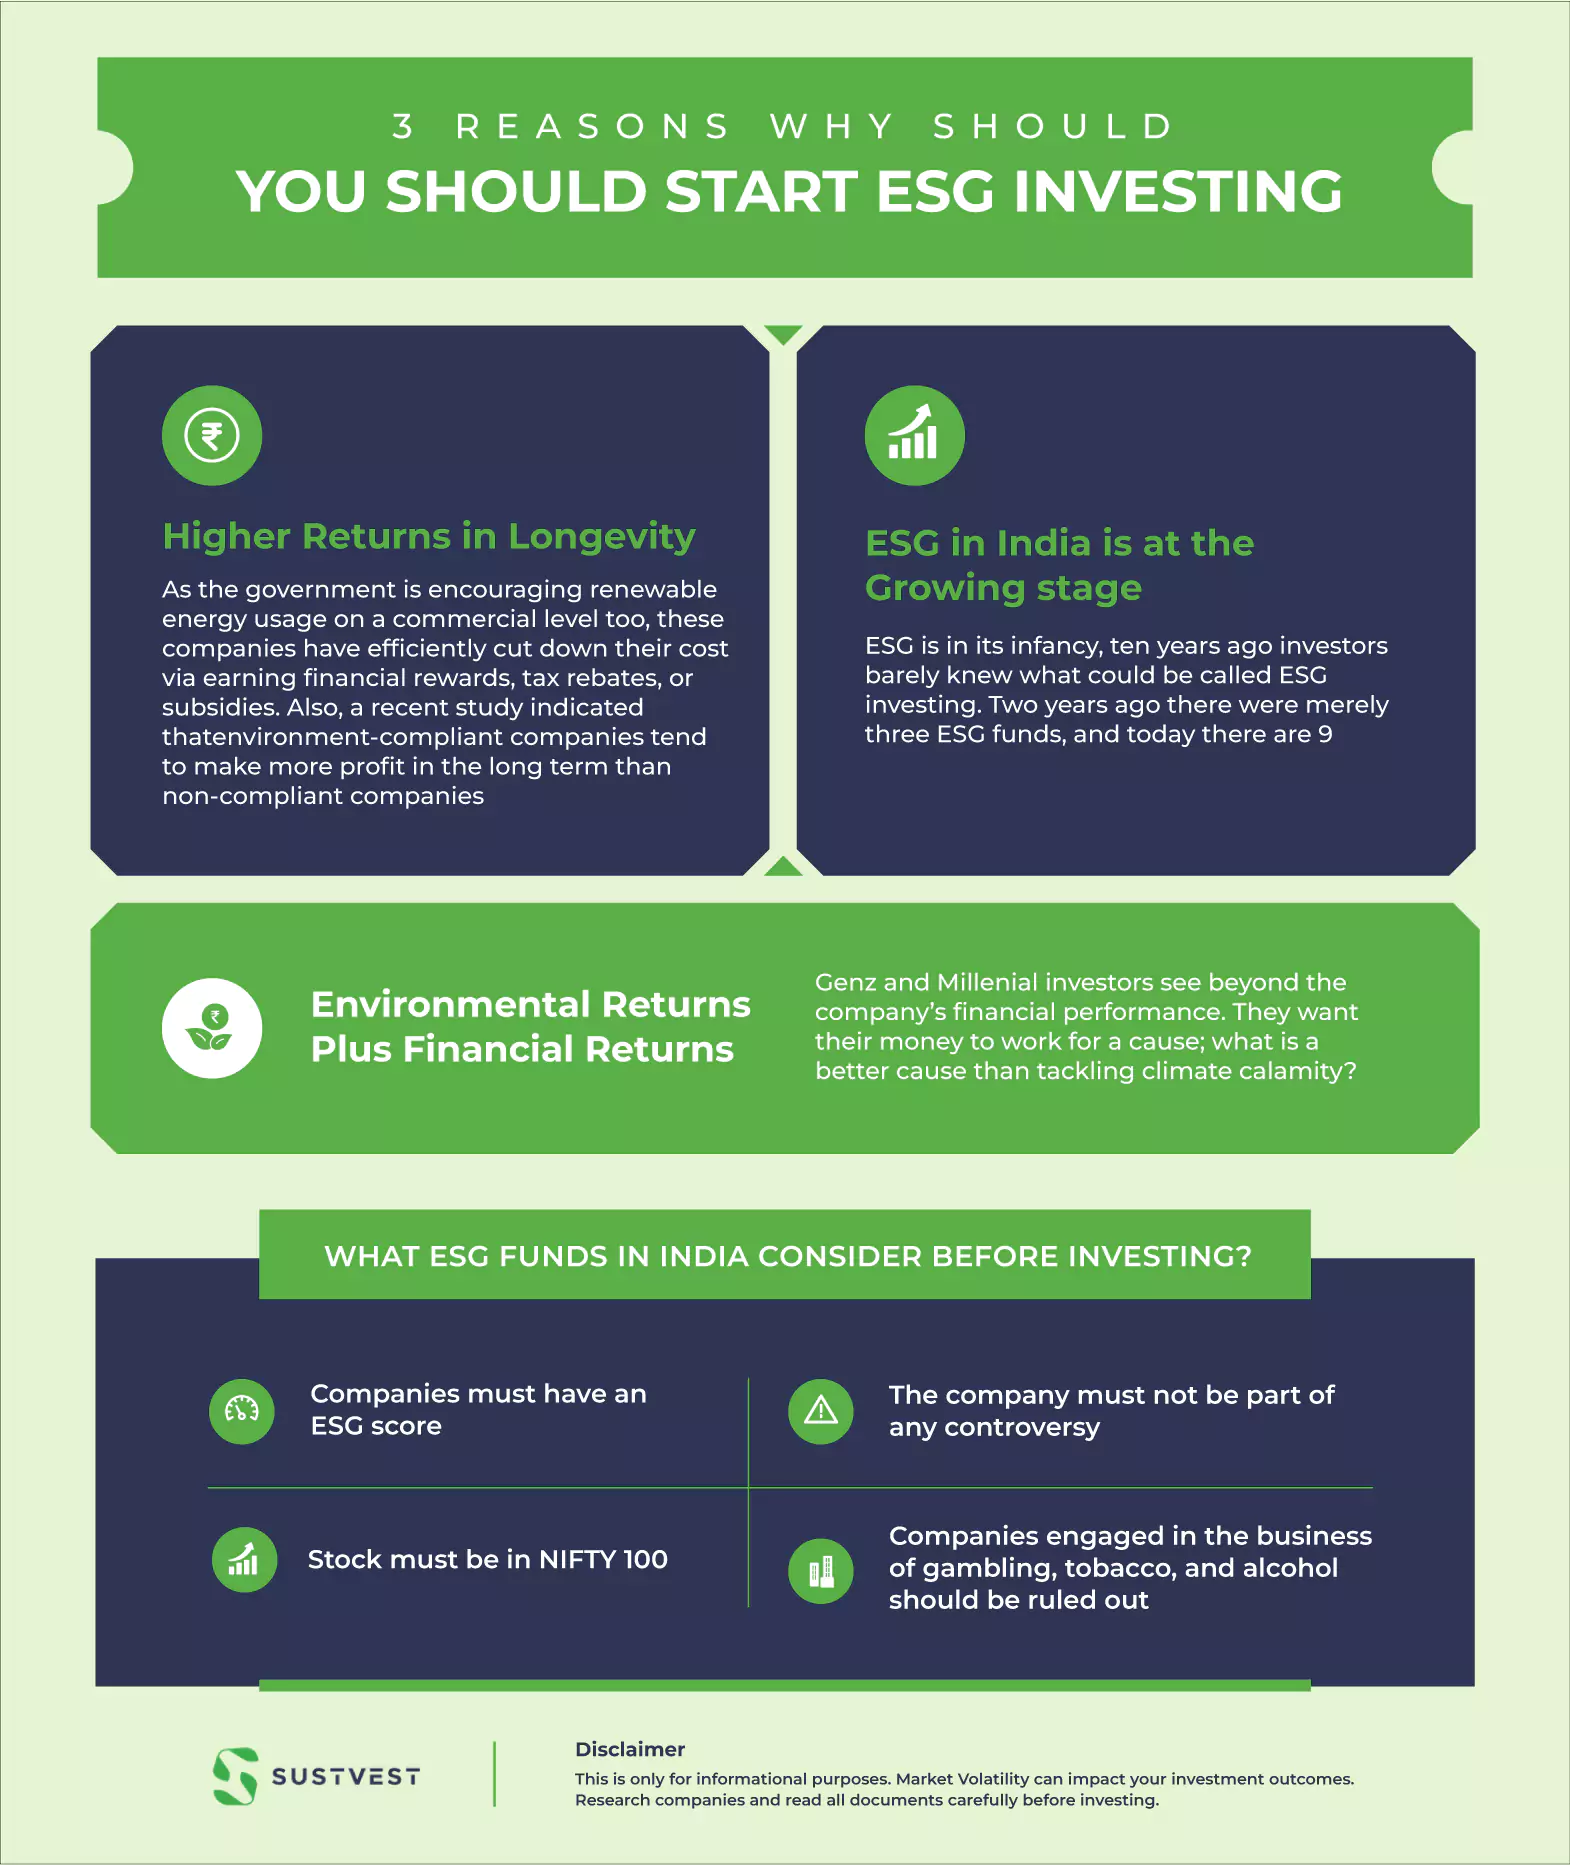 What is ESG investing